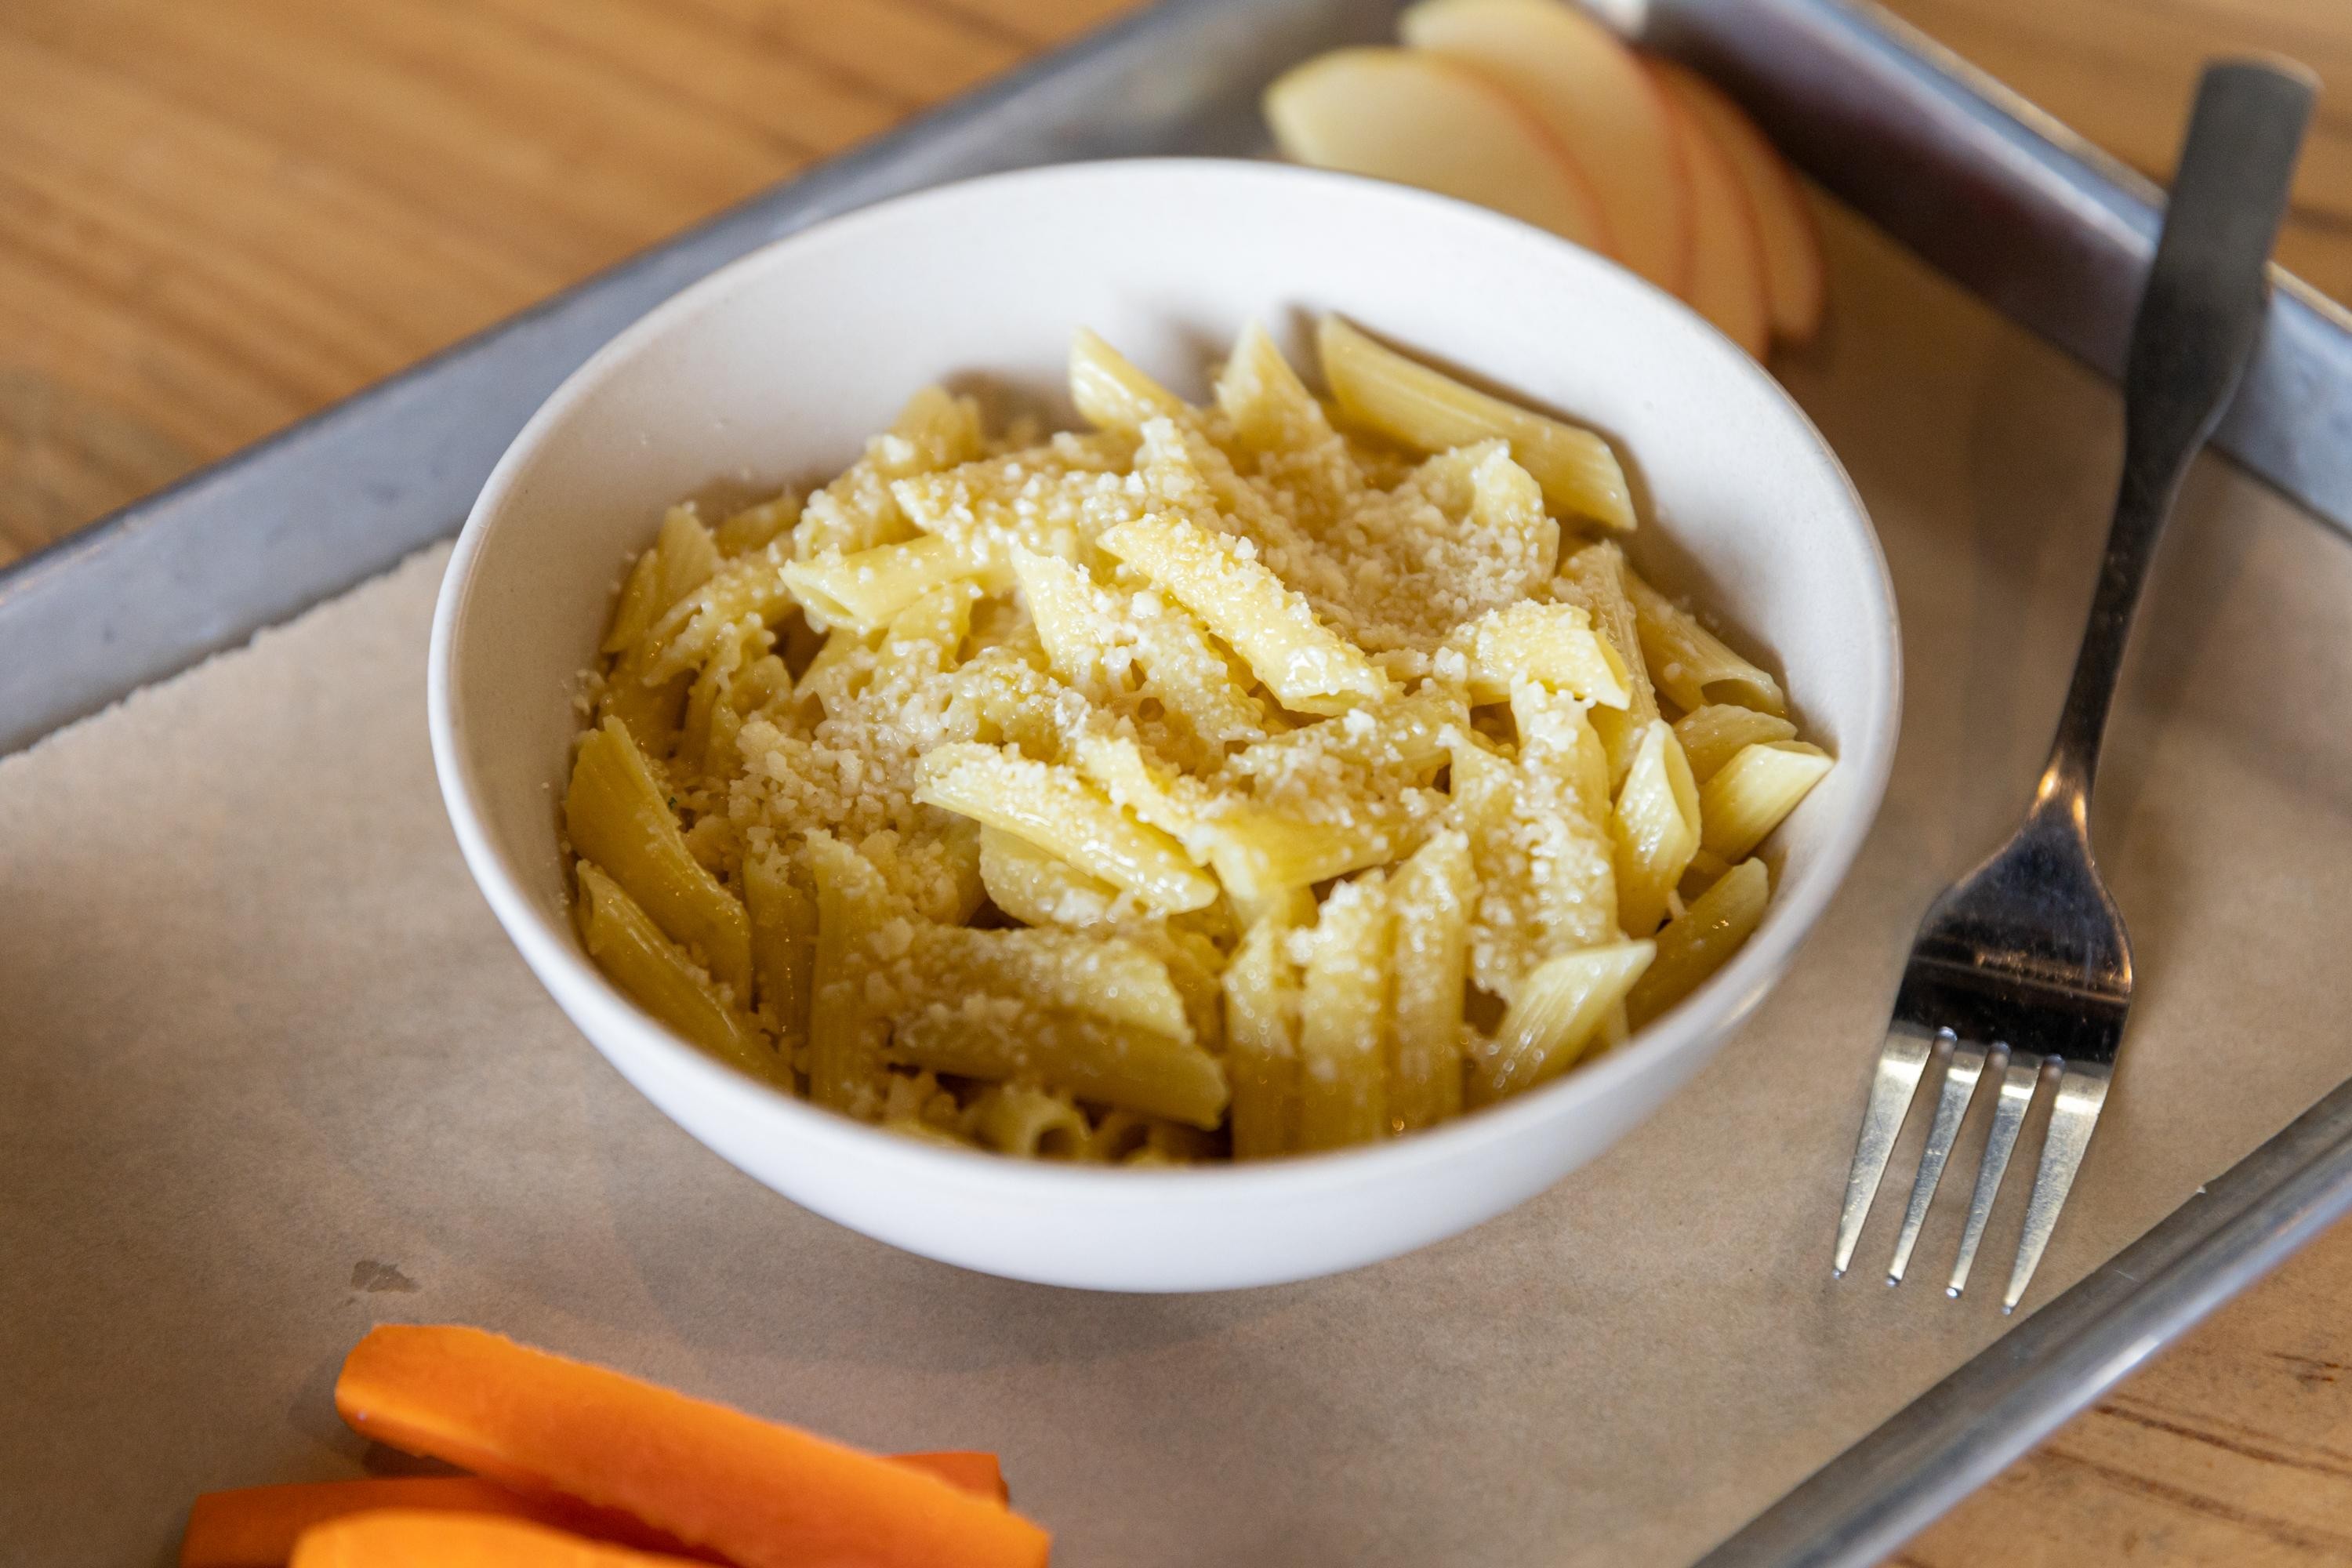 Kid's Buttered Pasta with Parmesean